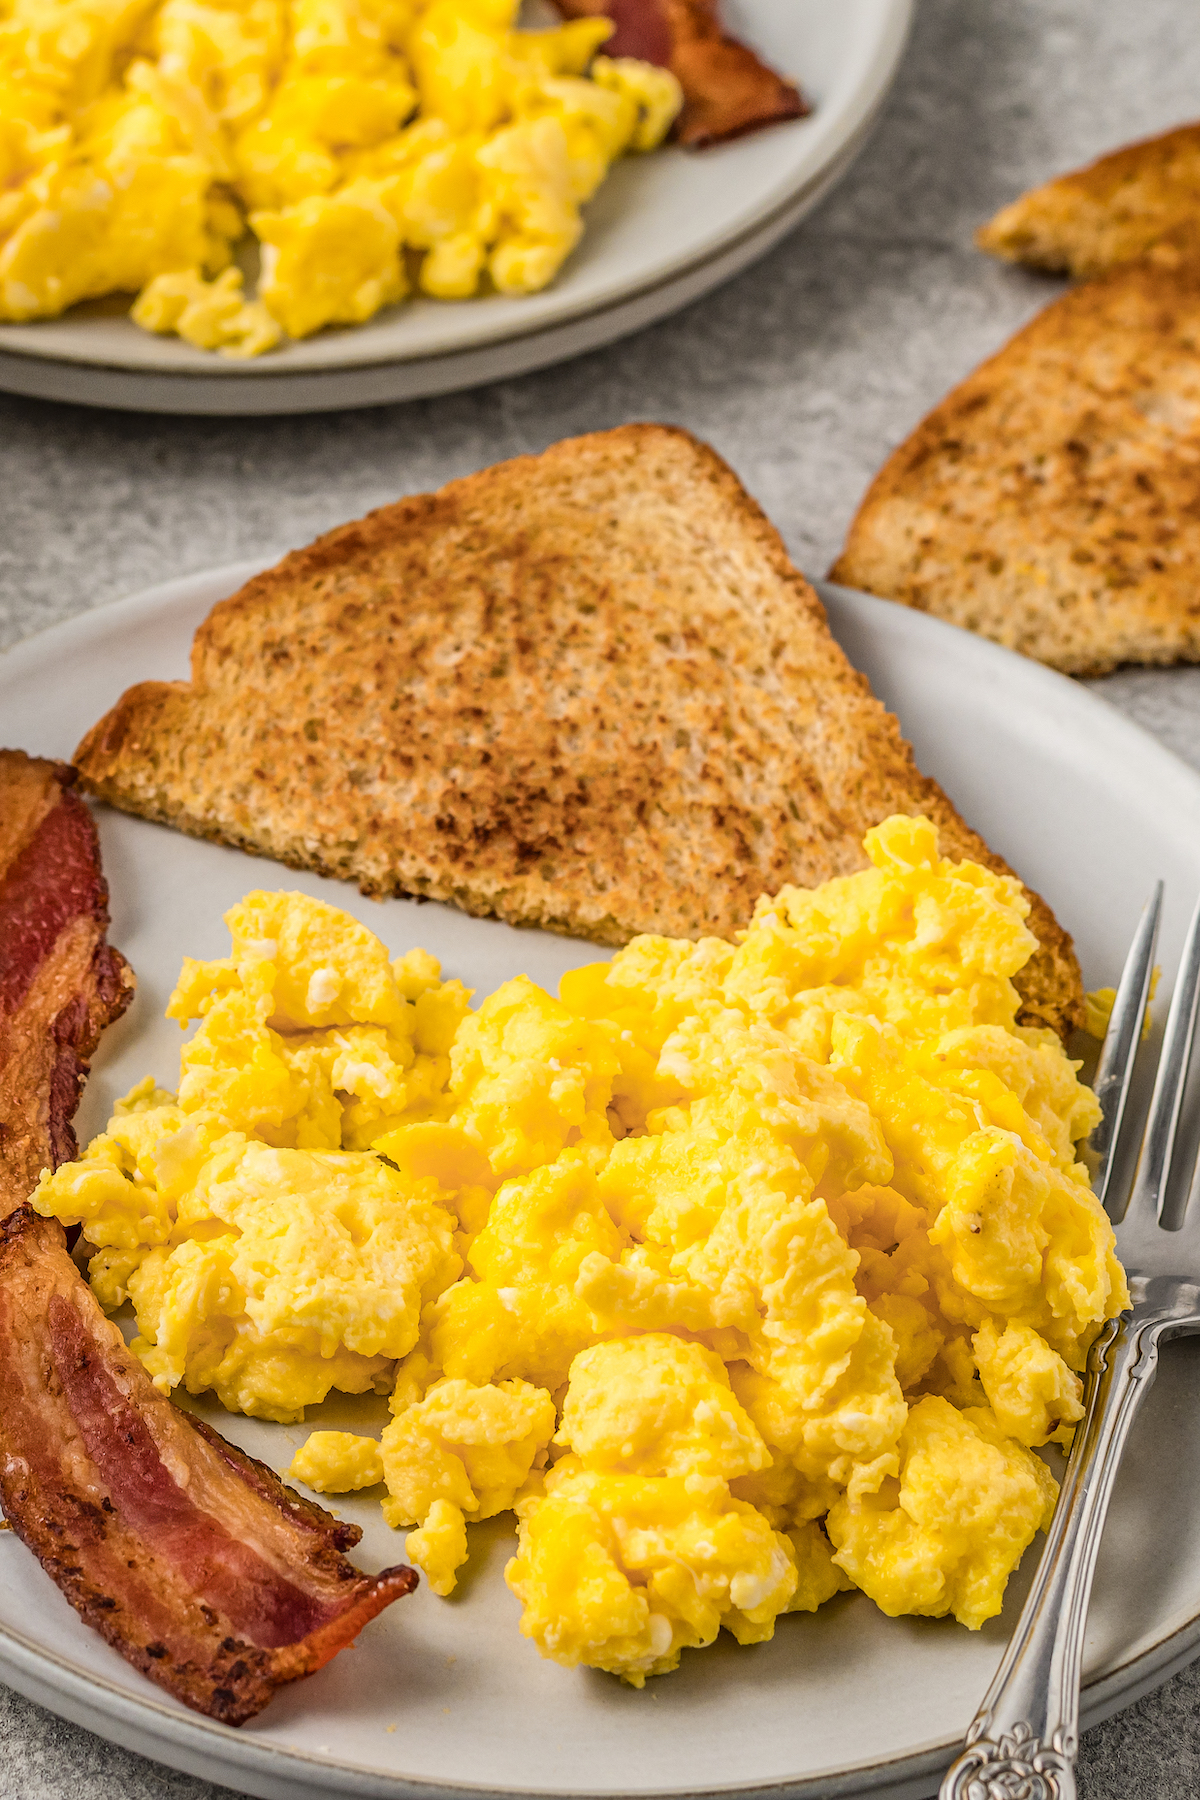 Scrambled eggs on a plate next to toast and bacon.